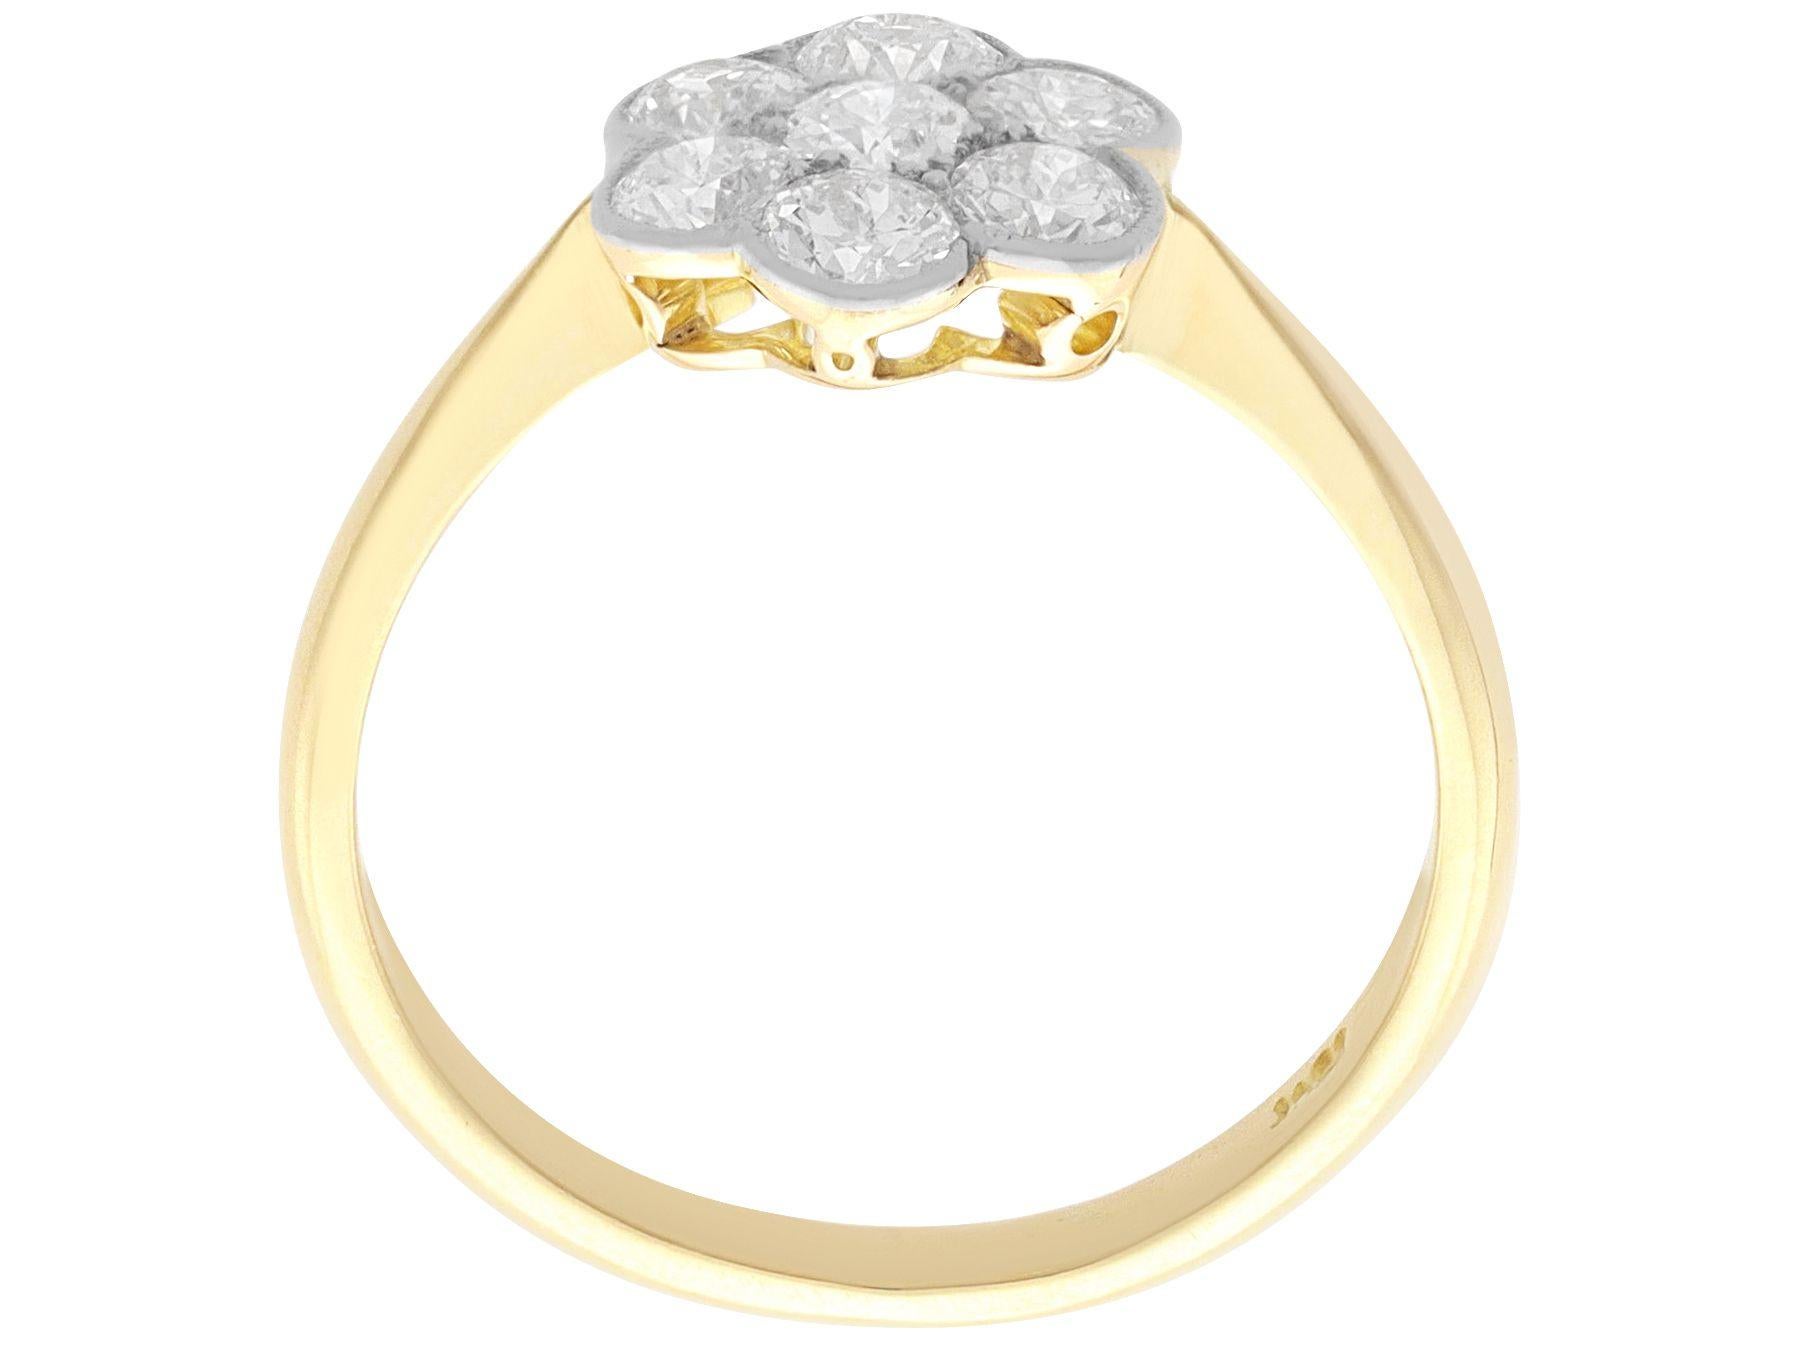 Women's or Men's Antique 1.05 Carat Diamond and Yellow Gold Cluster Engagement Ring, circa 1930 For Sale